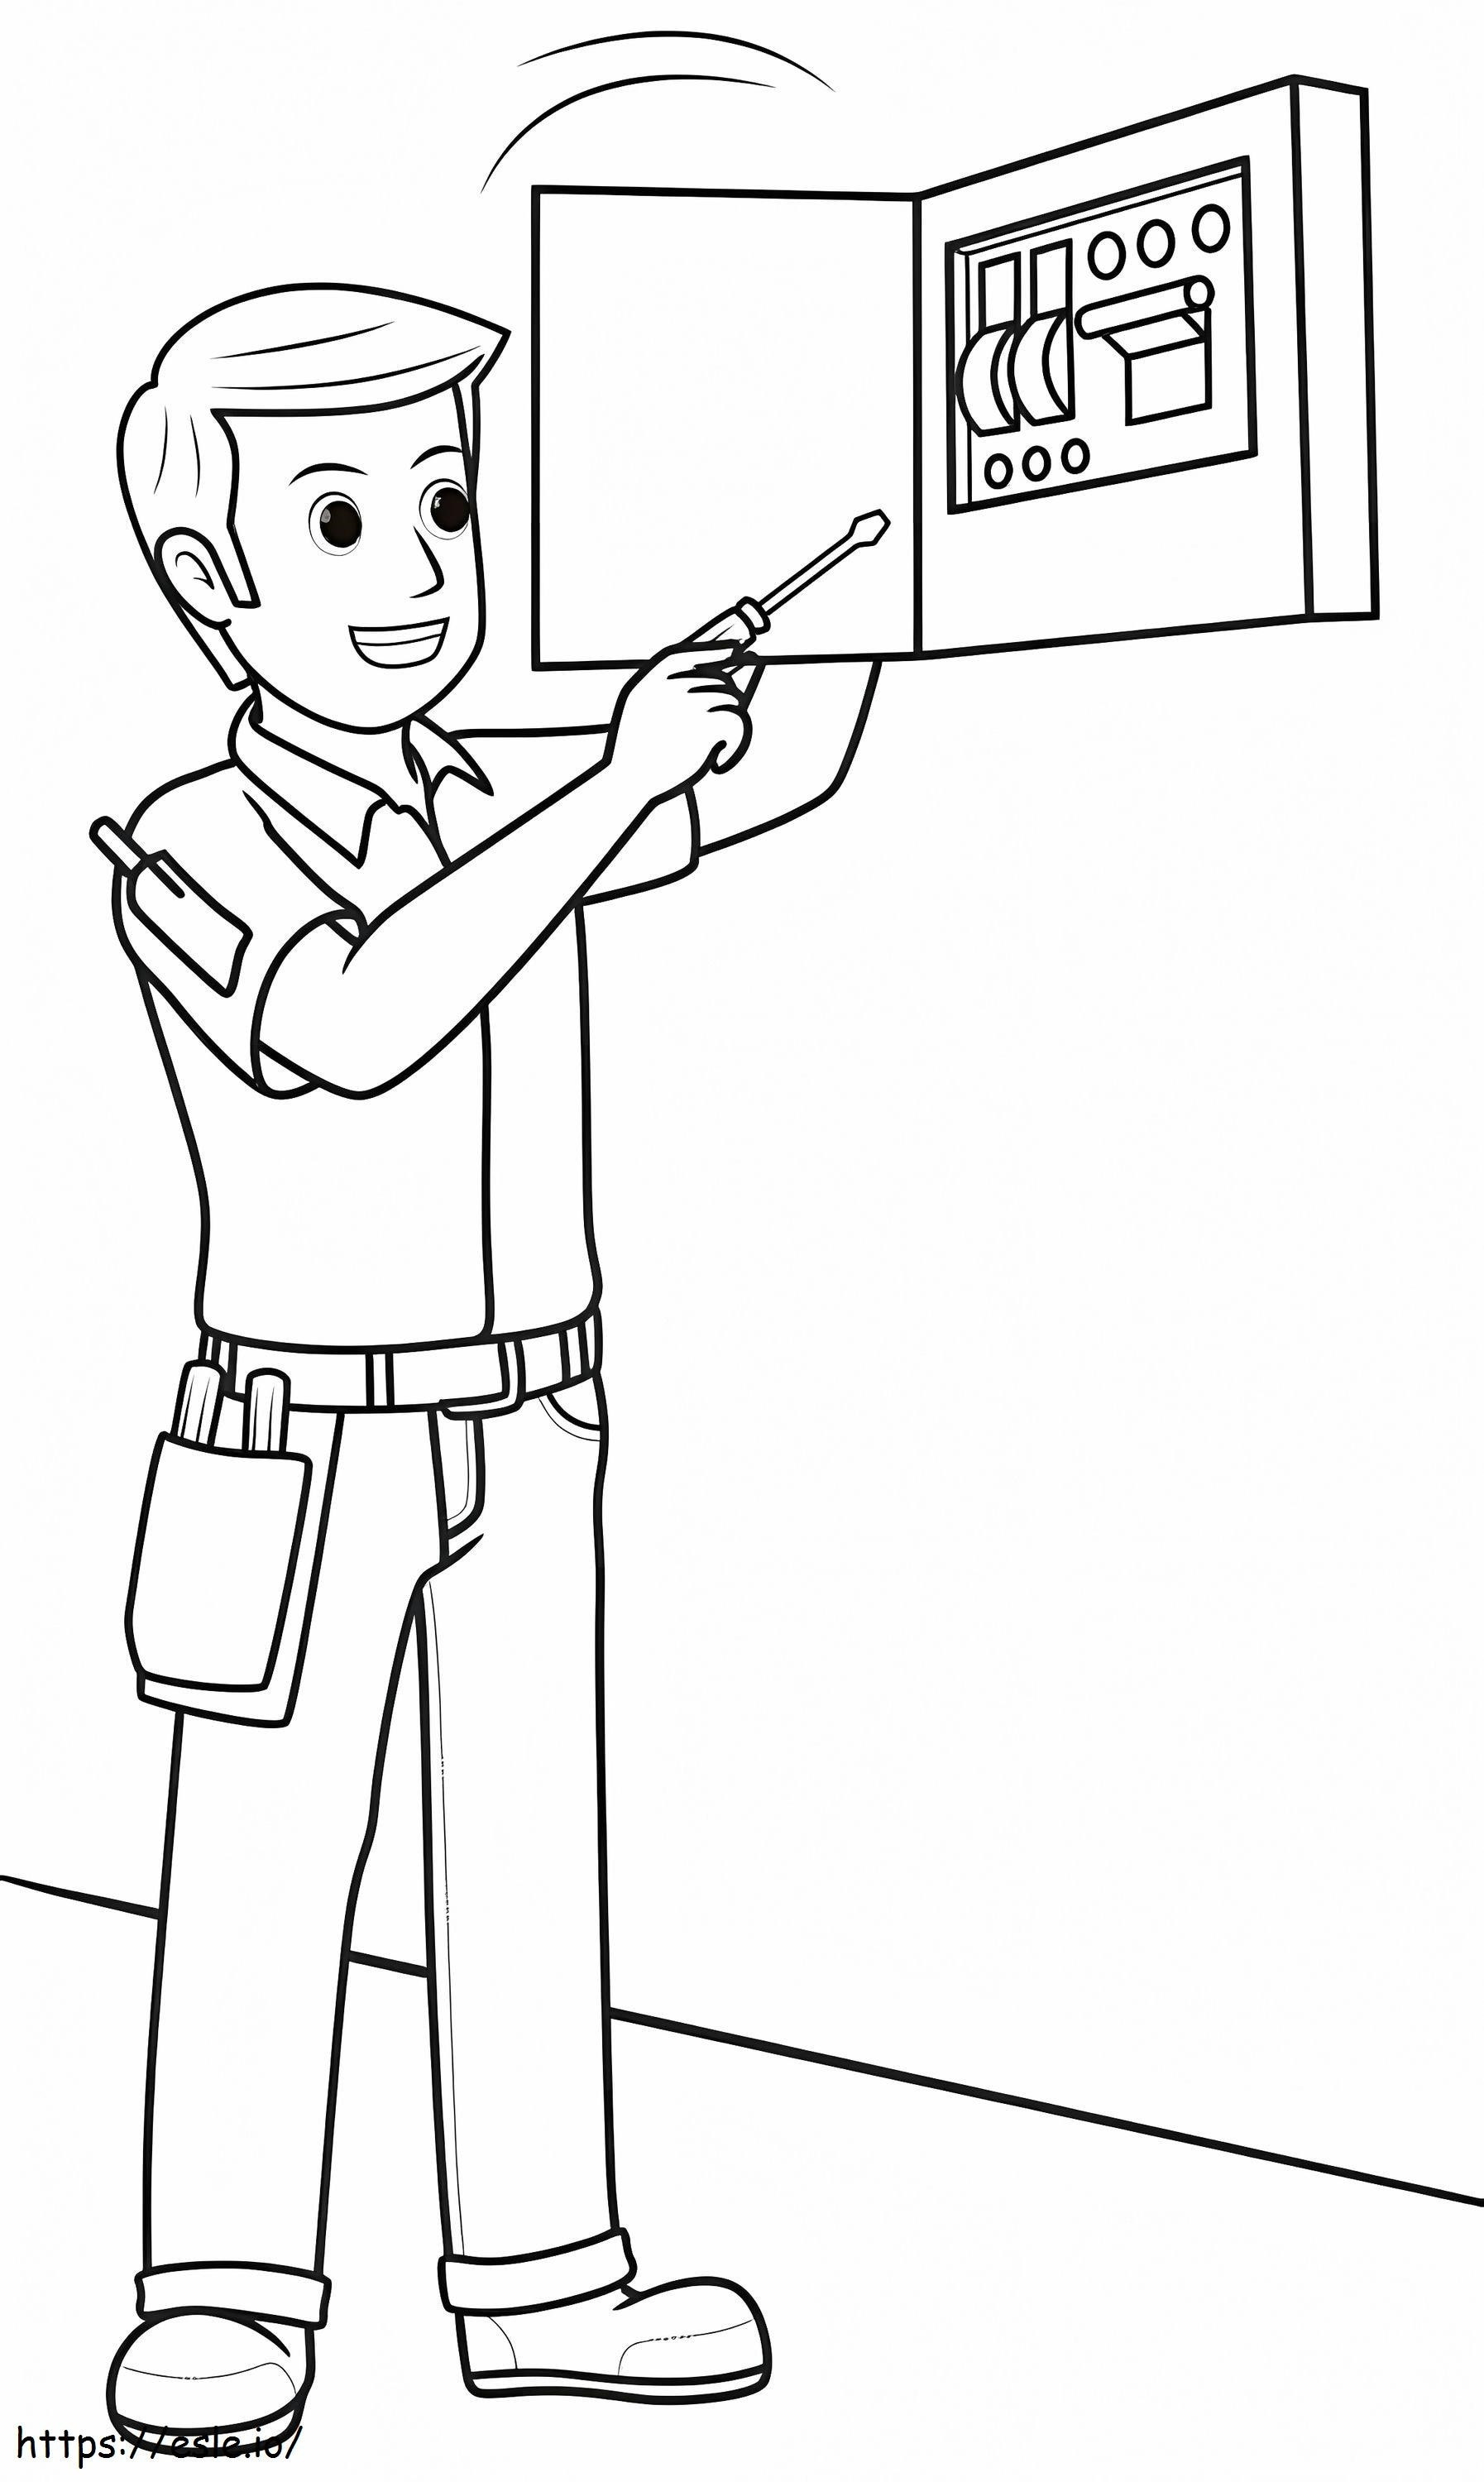 Electrician 4 coloring page